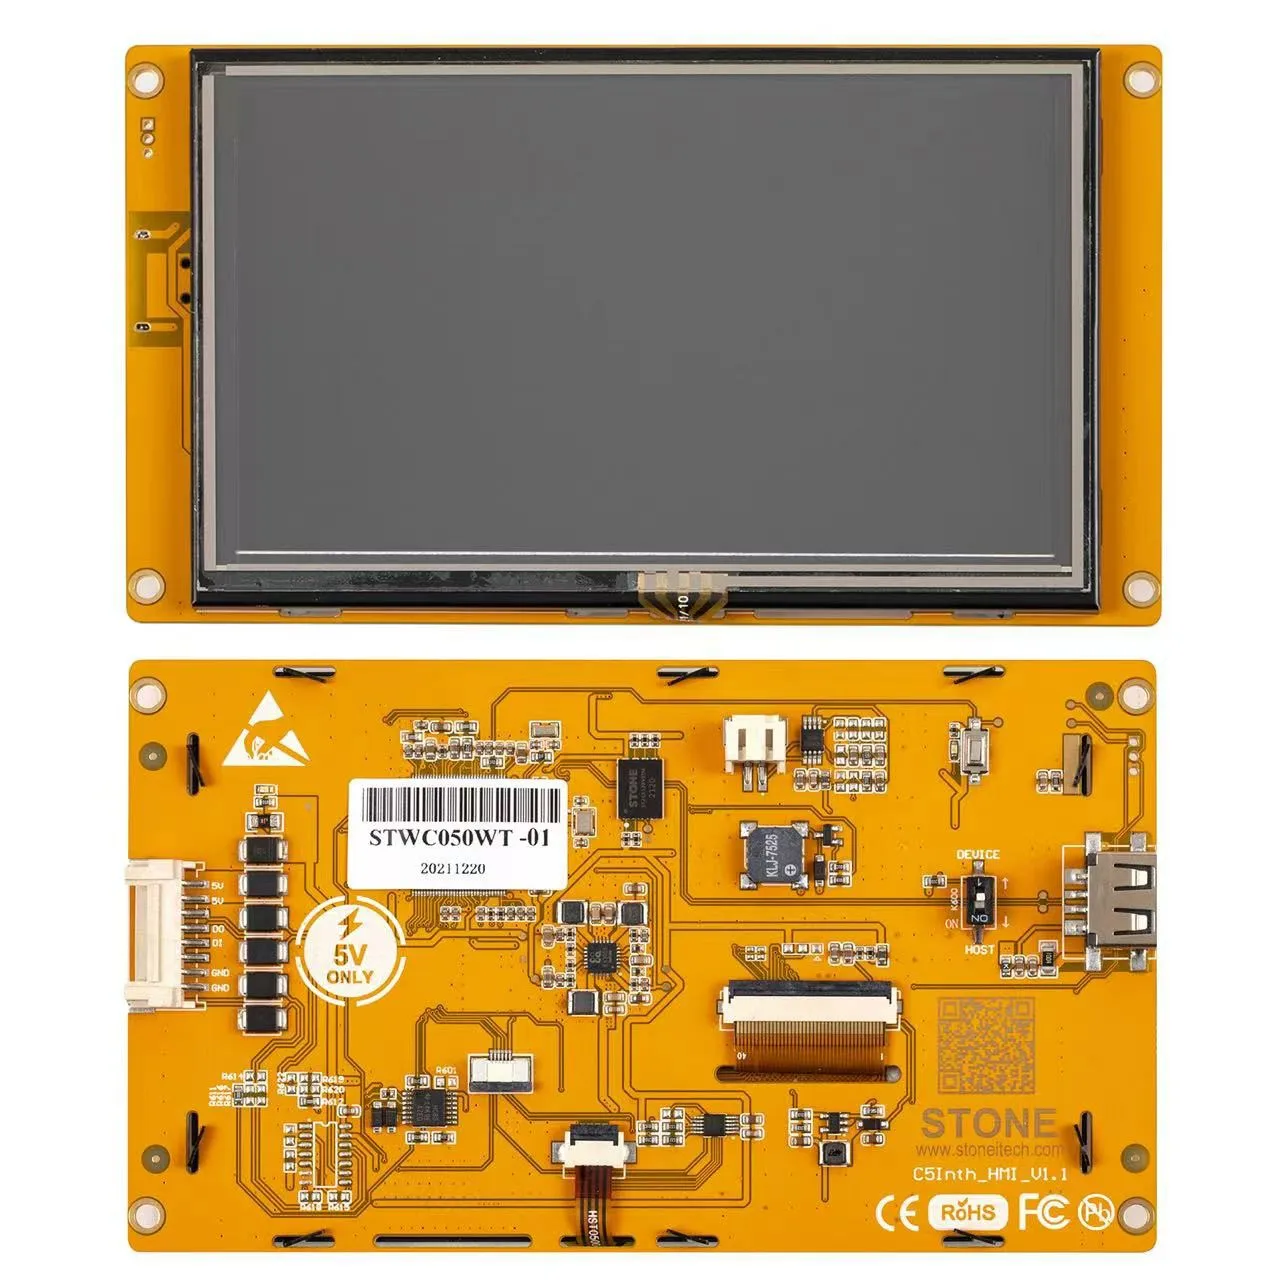 5 Inch HMI Intelligent LCD Module TFT Display Touch Screen with Free GUI Software Easy To Operate Support Any MCU